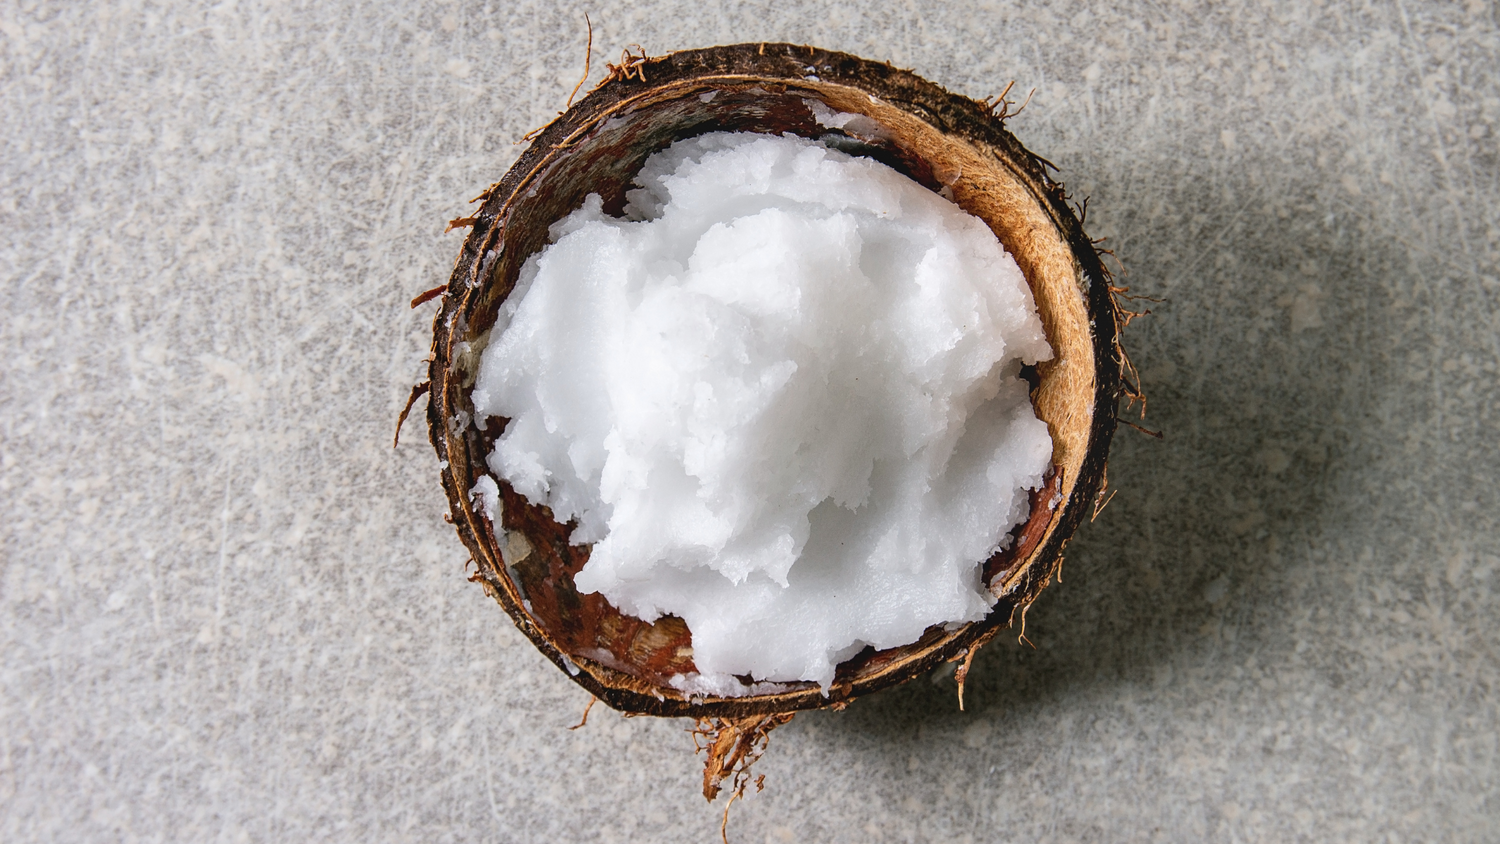 14 Reasons to Love Coconut Oil